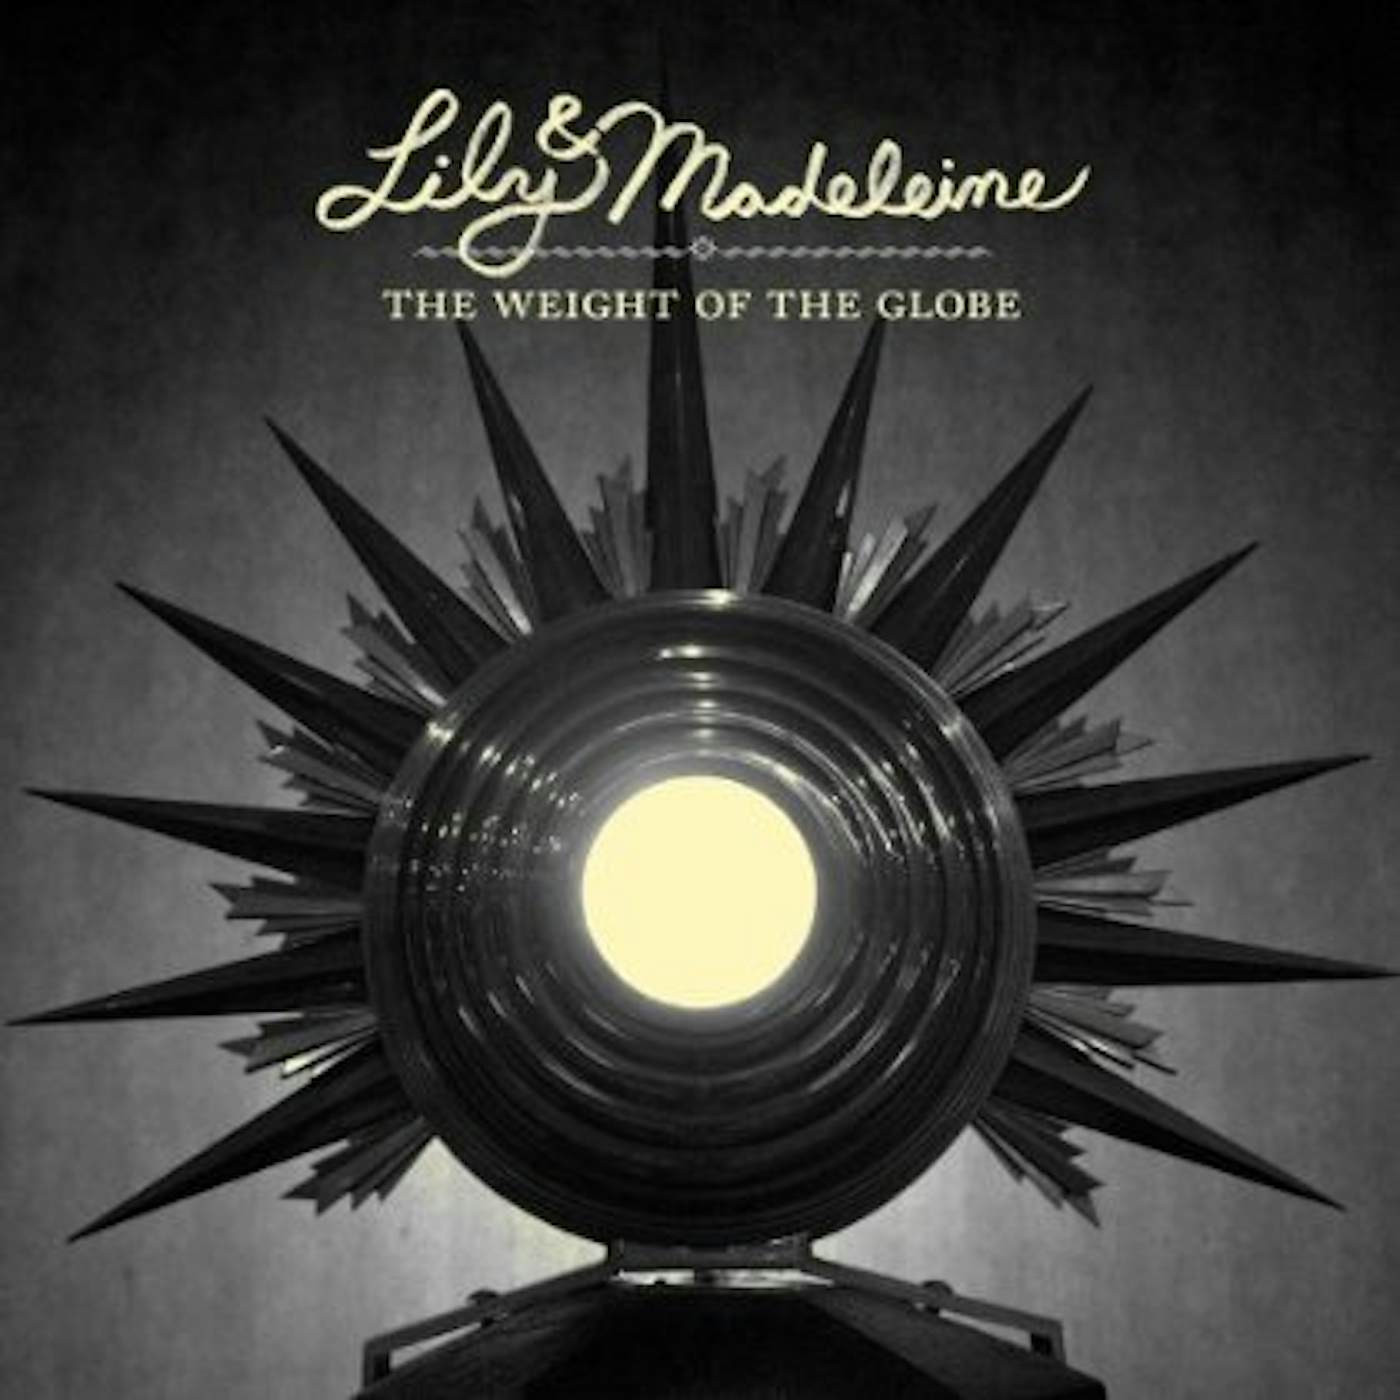 Lily & Madeleine WEIGHT OF THE GLOBE CD